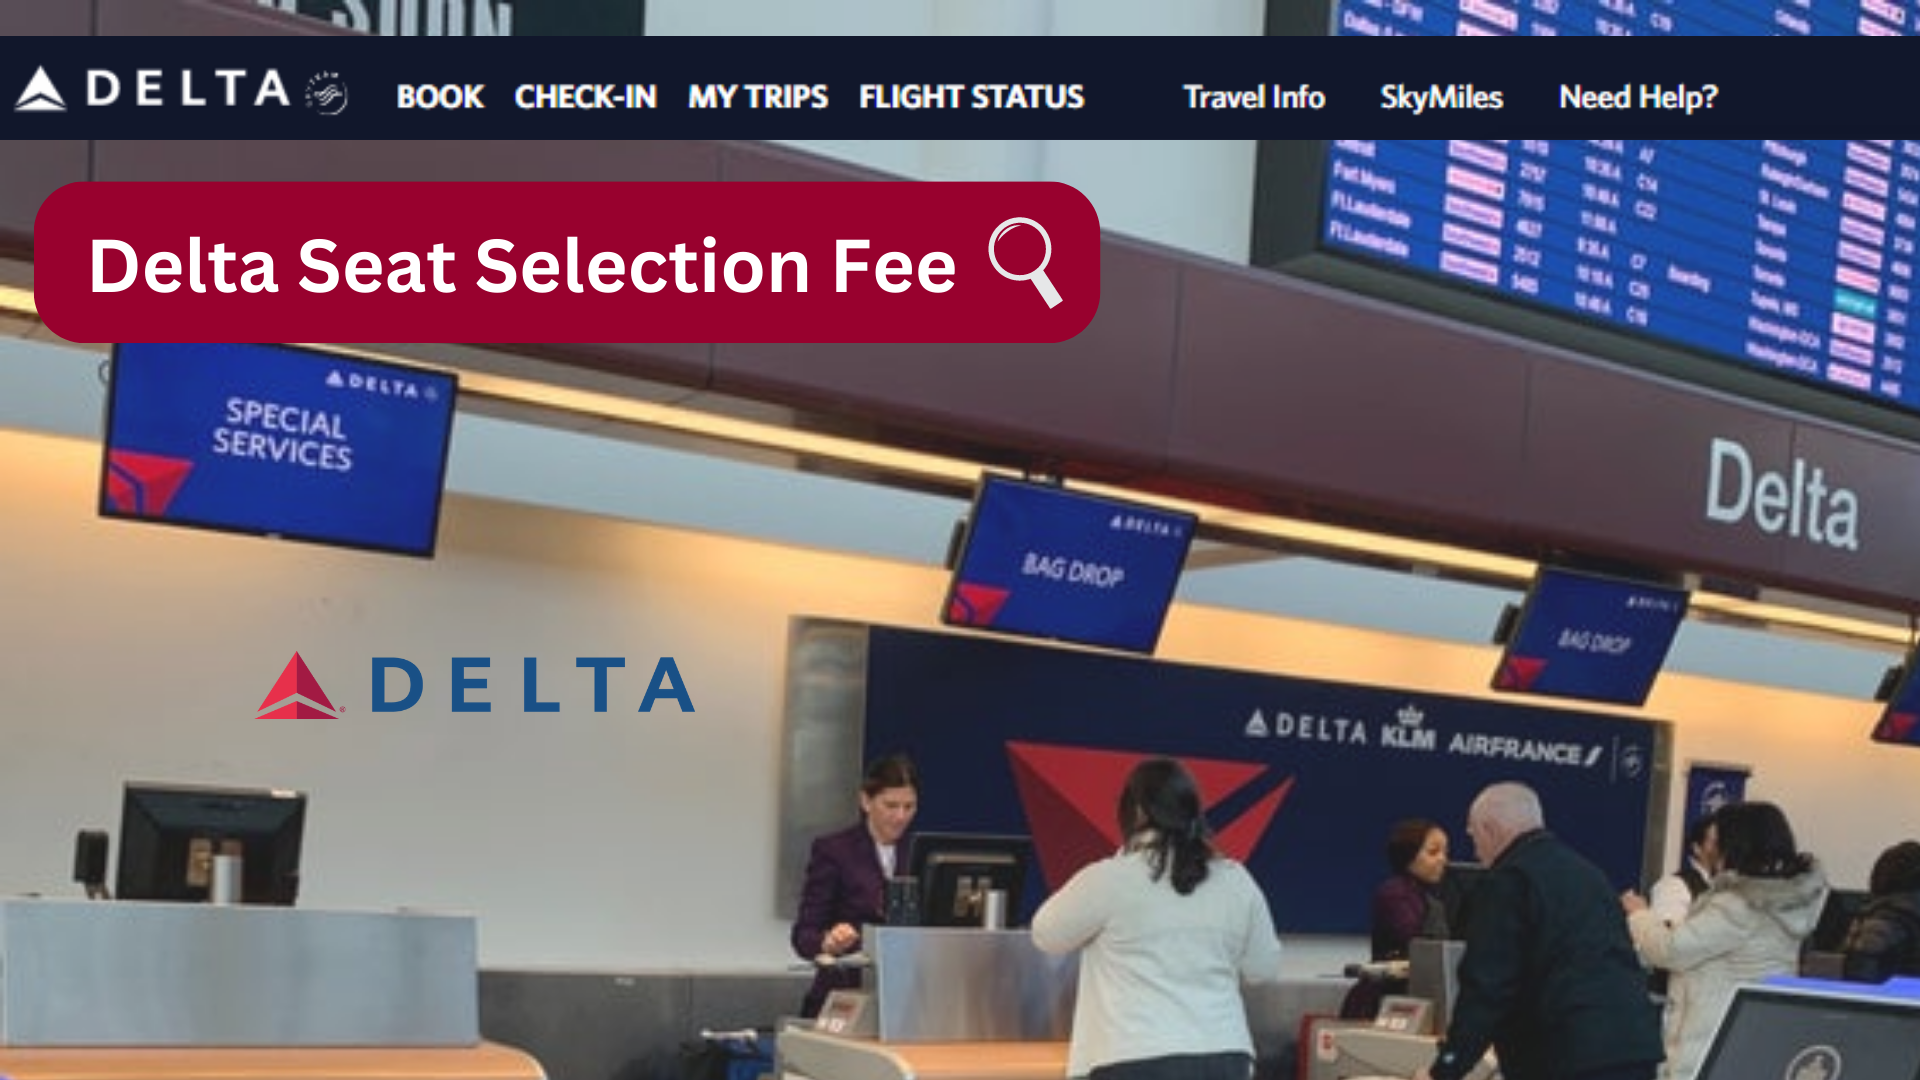 Delta Seat Selection Fee